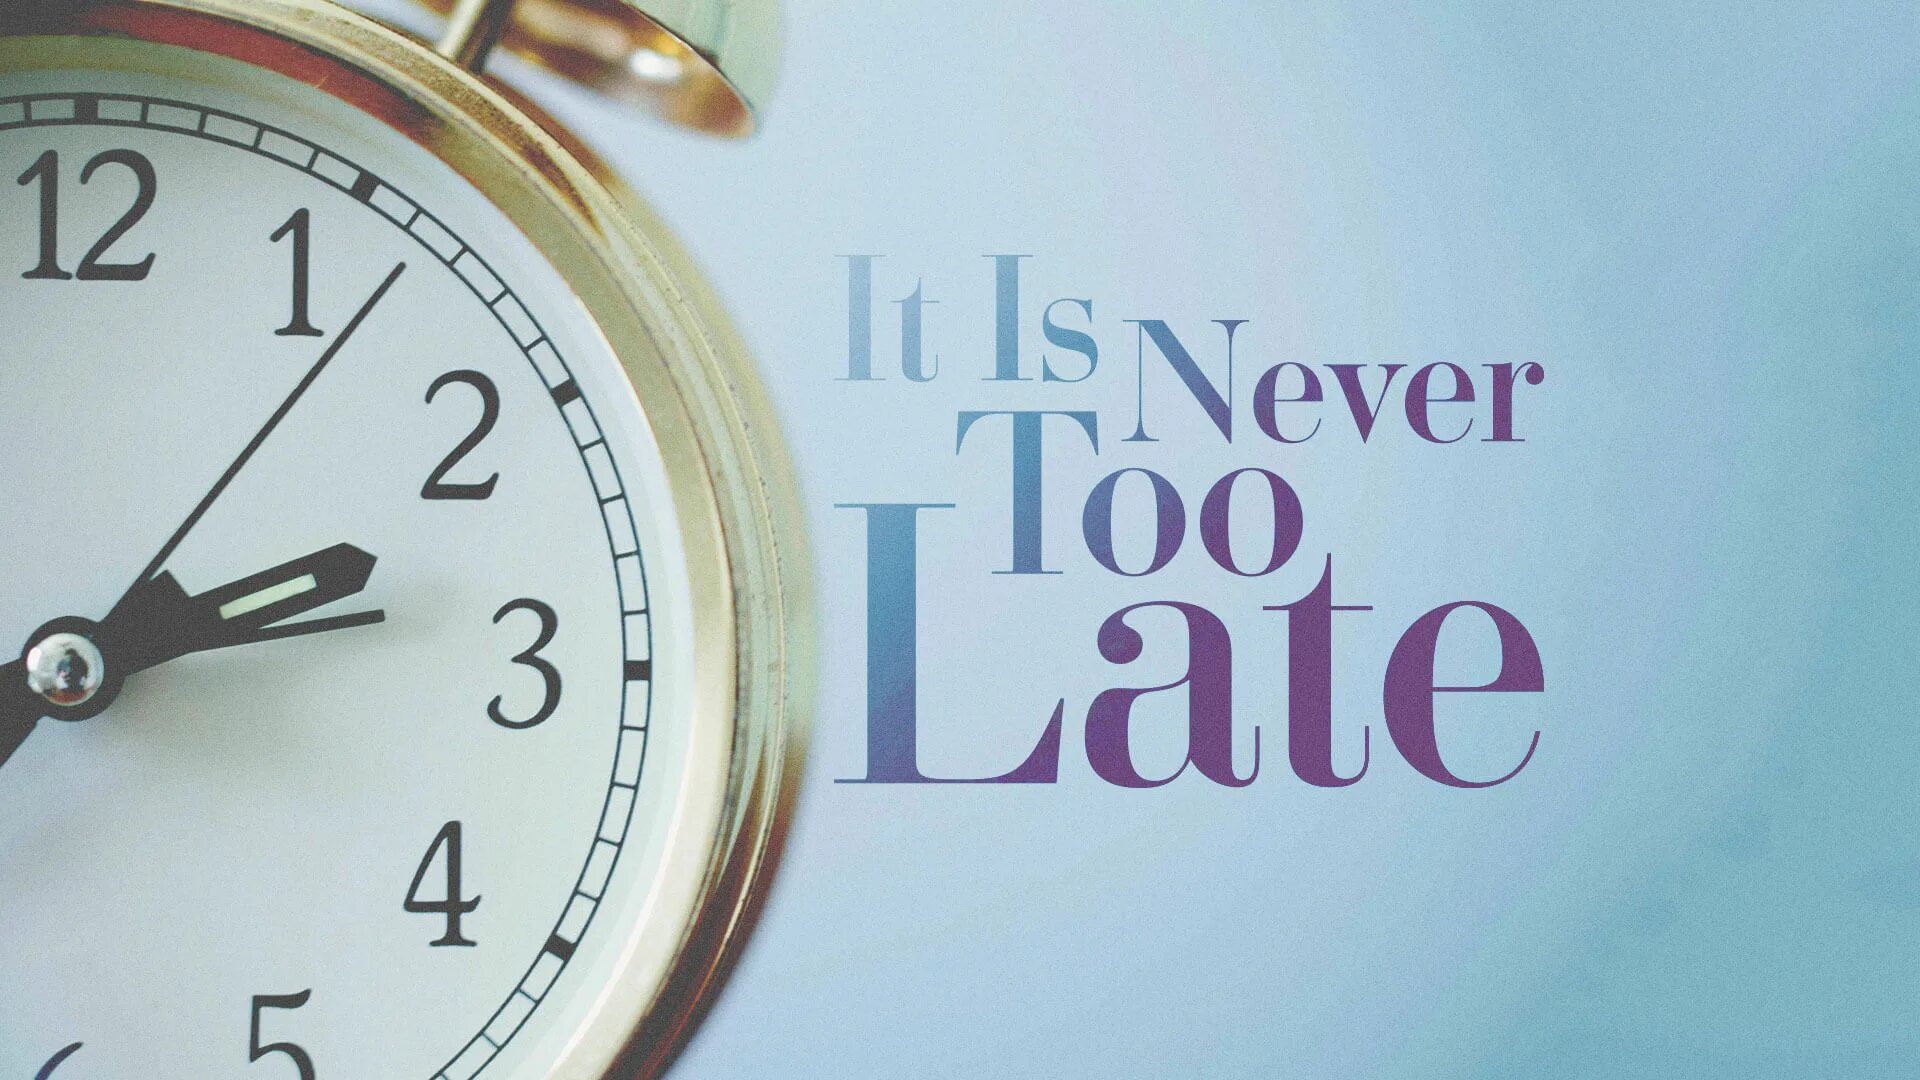 It is late i go home. Never too late. It's never too late. Too late too late. Never too late картинка.